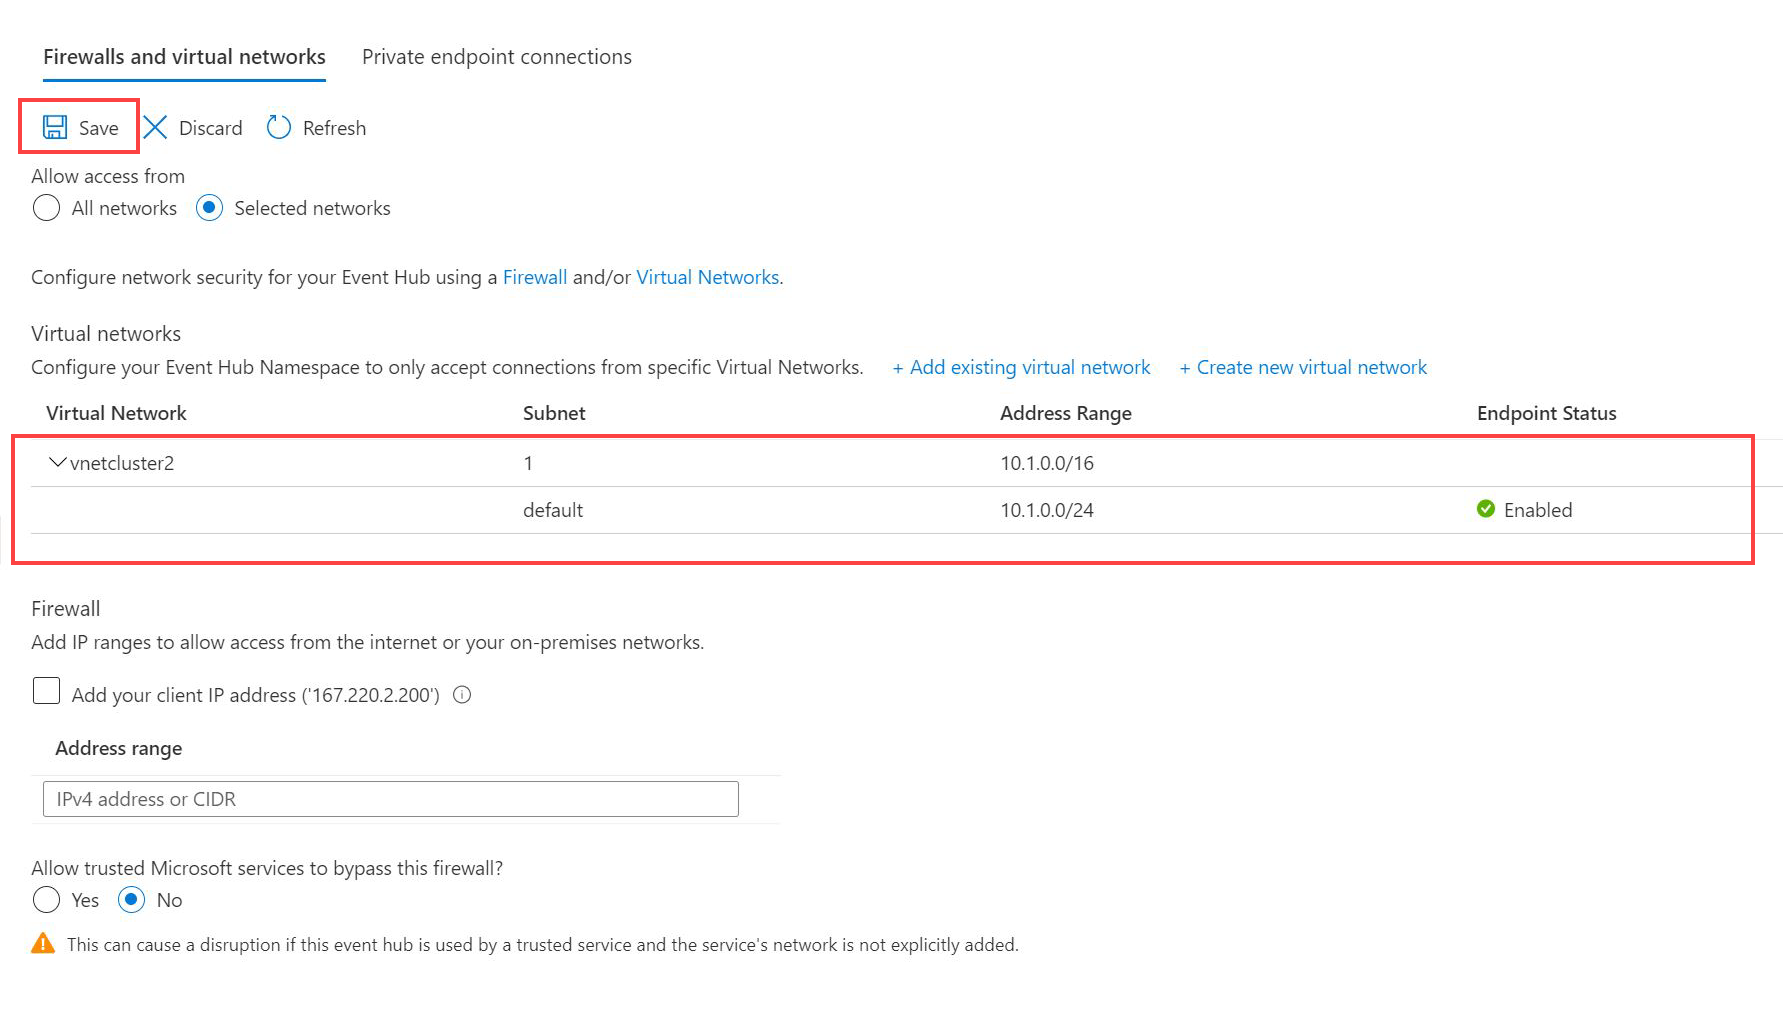 Add virtual network and subnet in event hub to connect to Azure Data Explorer.